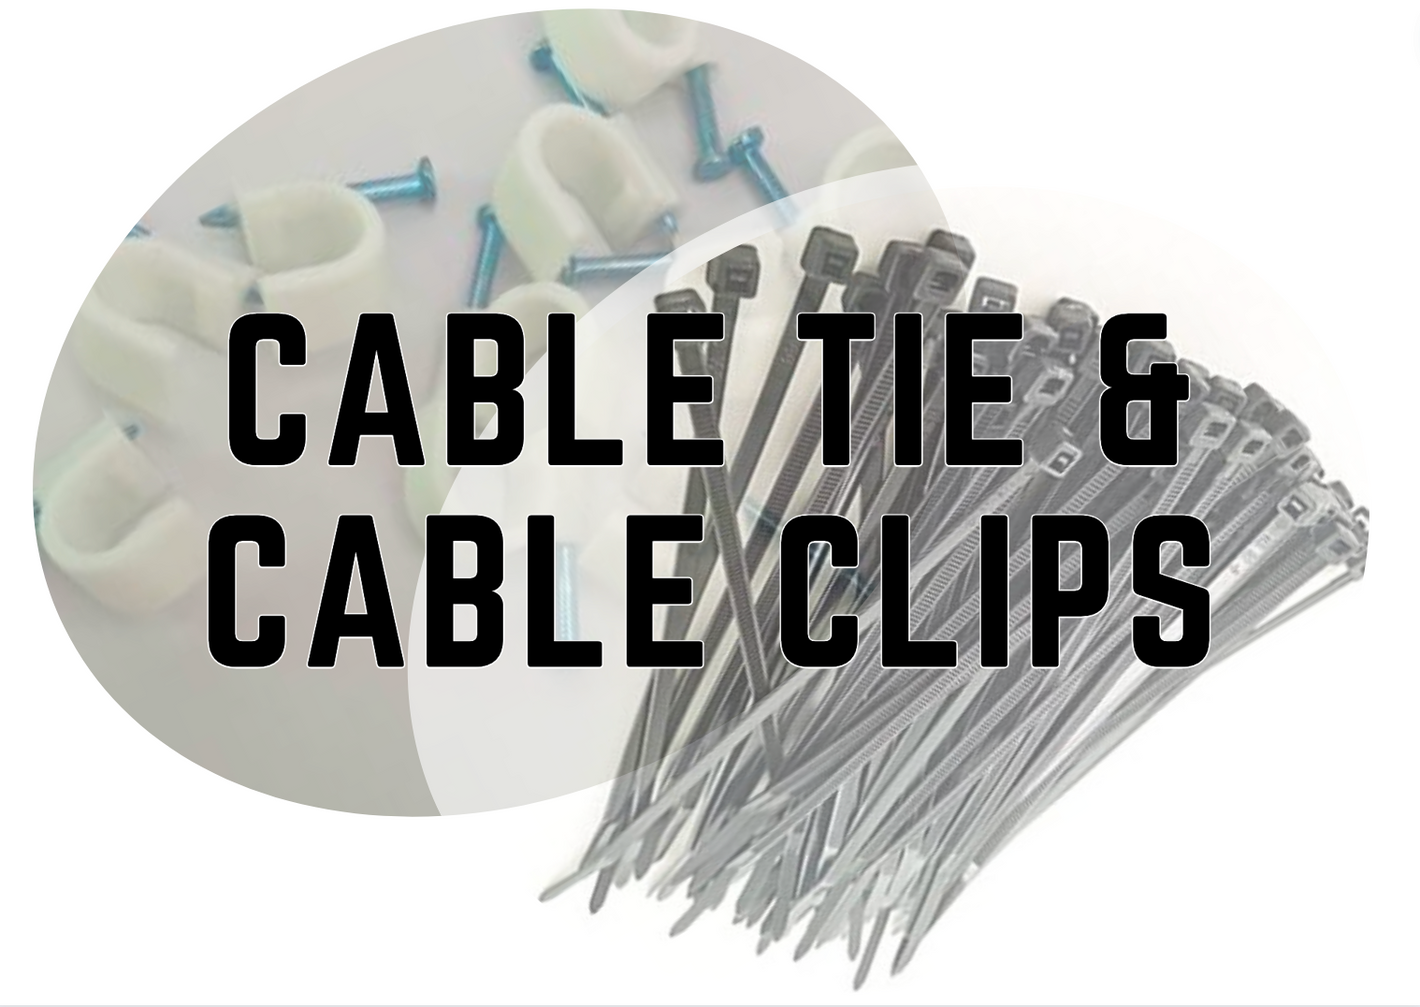 Cable Ties & Cable Clips